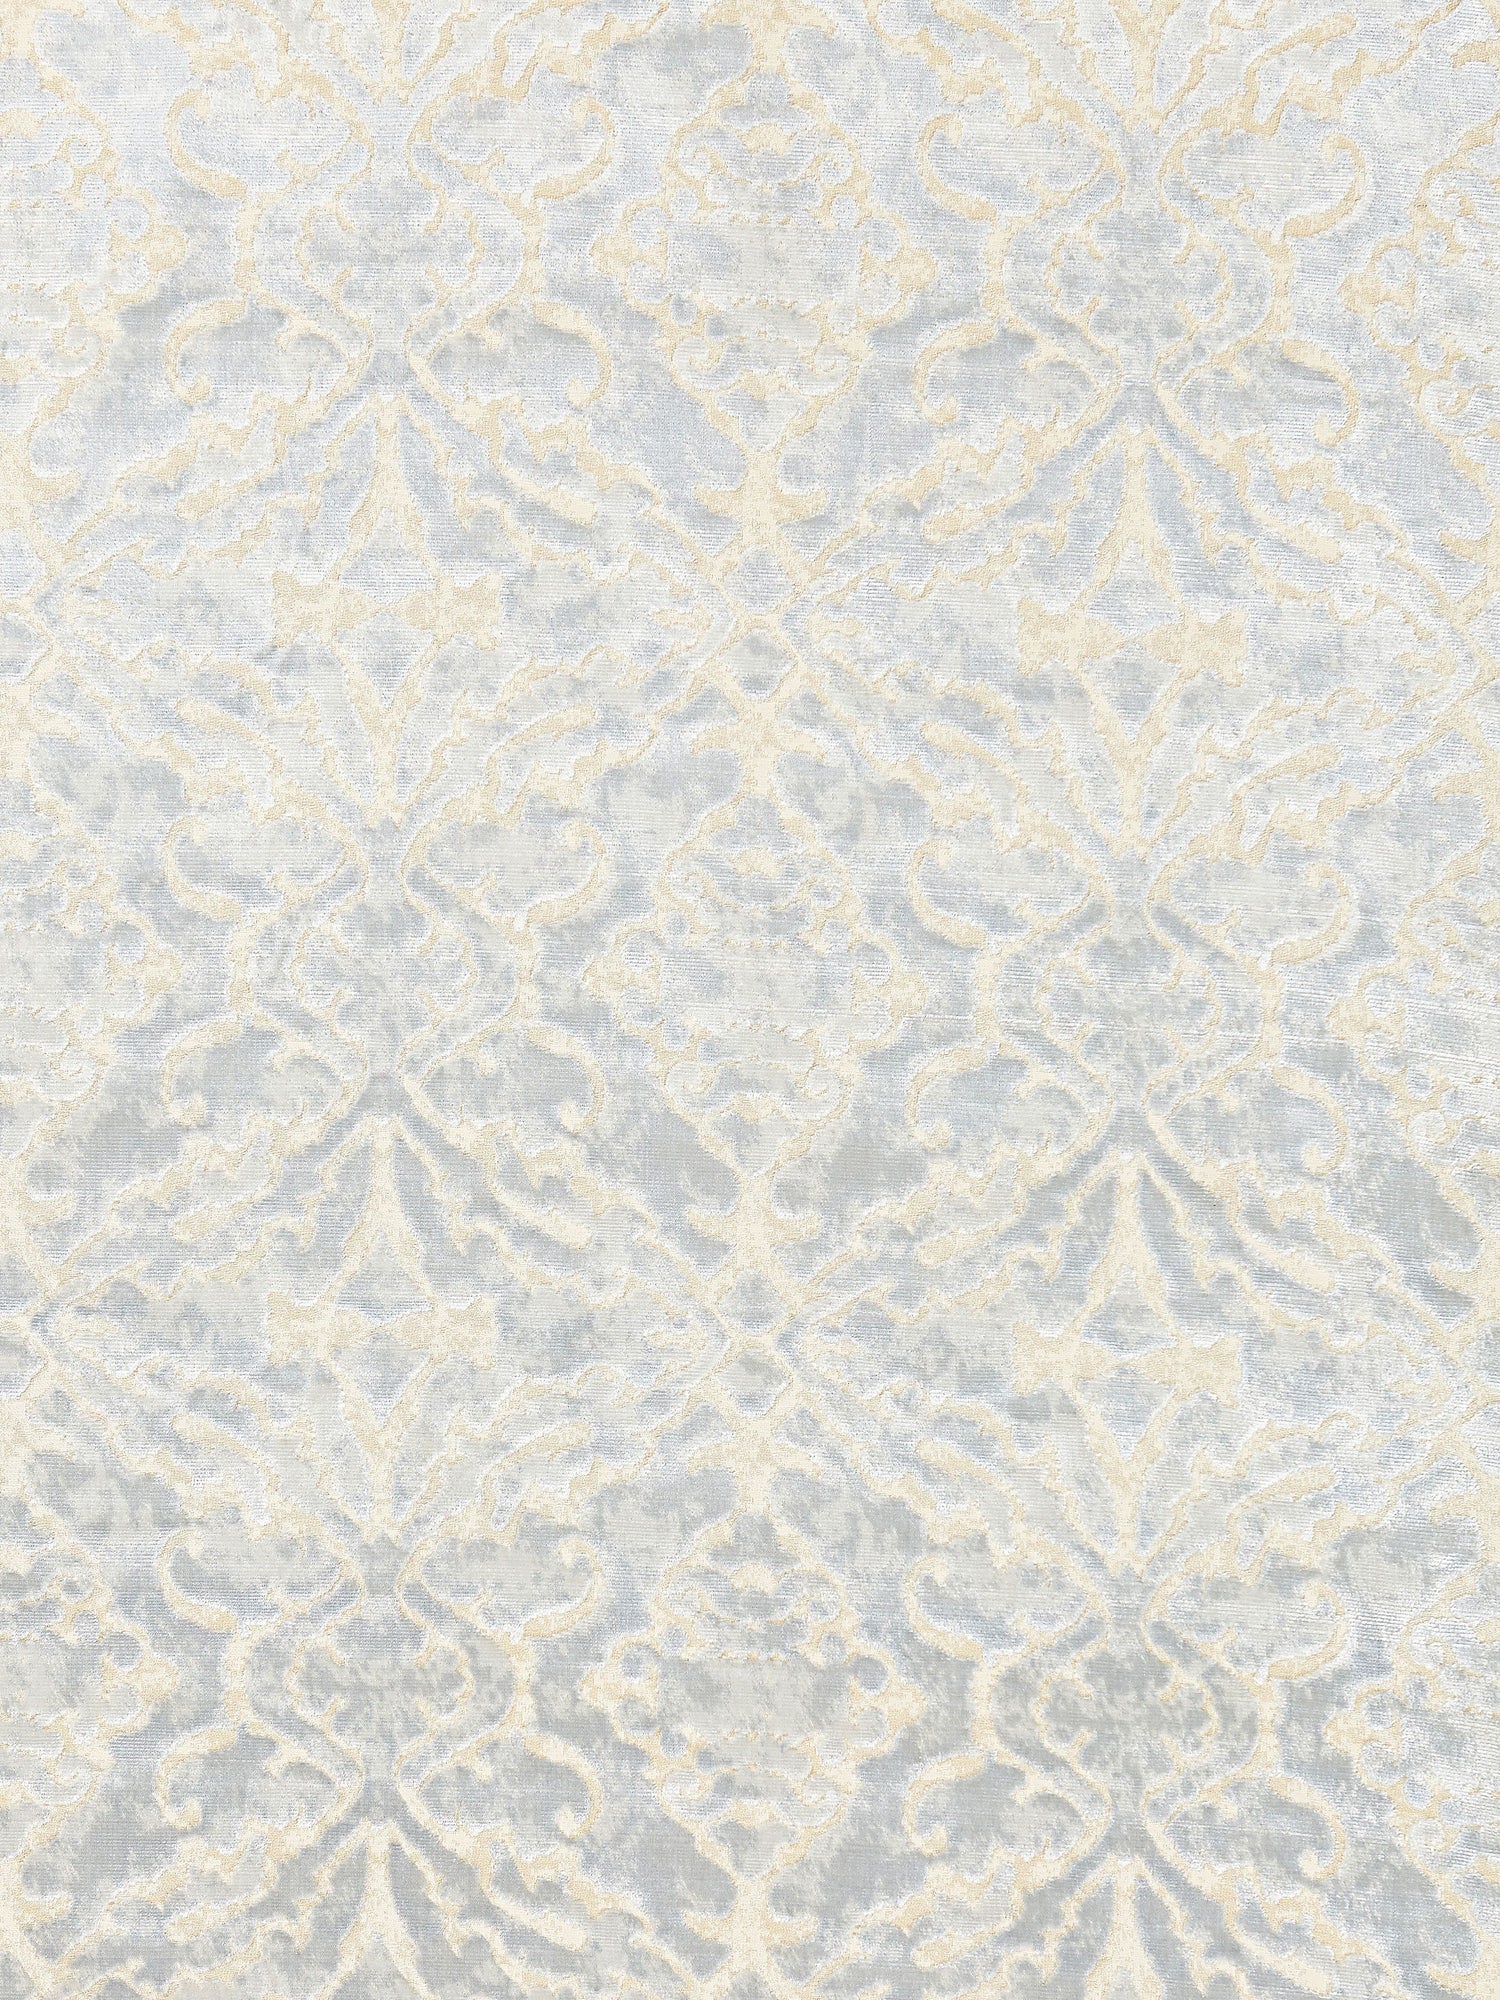 Palazzo Velvet fabric in glacier color - pattern number SC 000127084 - by Scalamandre in the Scalamandre Fabrics Book 1 collection